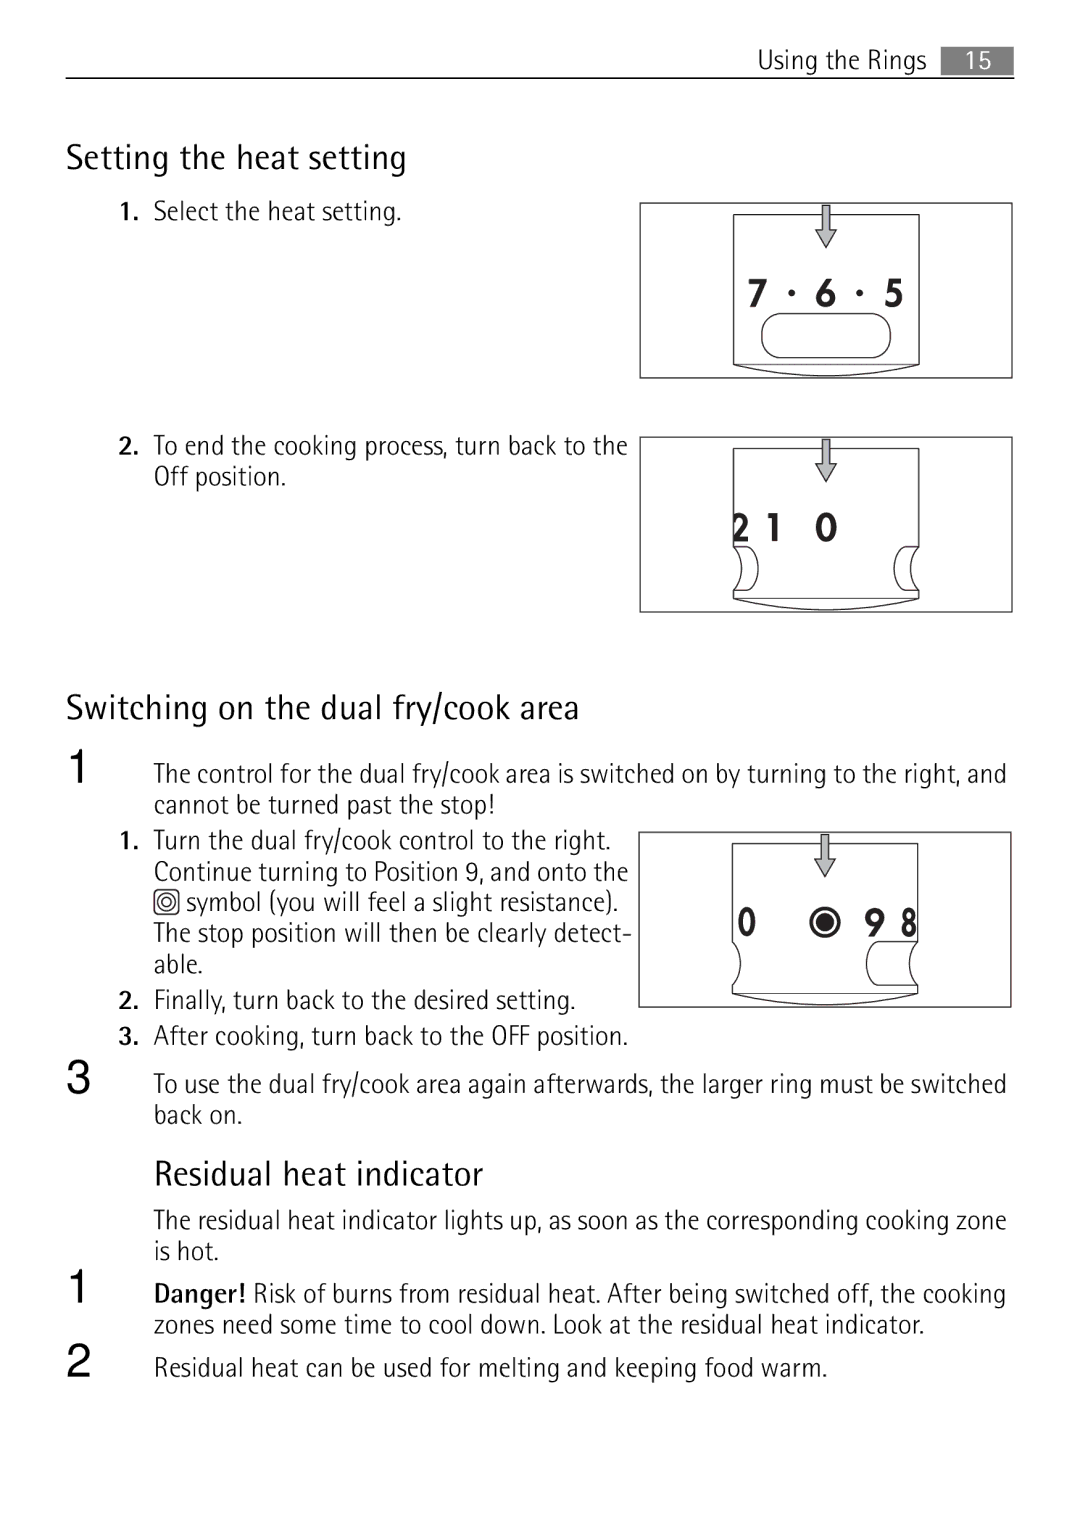 Electrolux 41056VH user manual Setting the heat setting, Switching on the dual fry/cook area, Residual heat indicator 